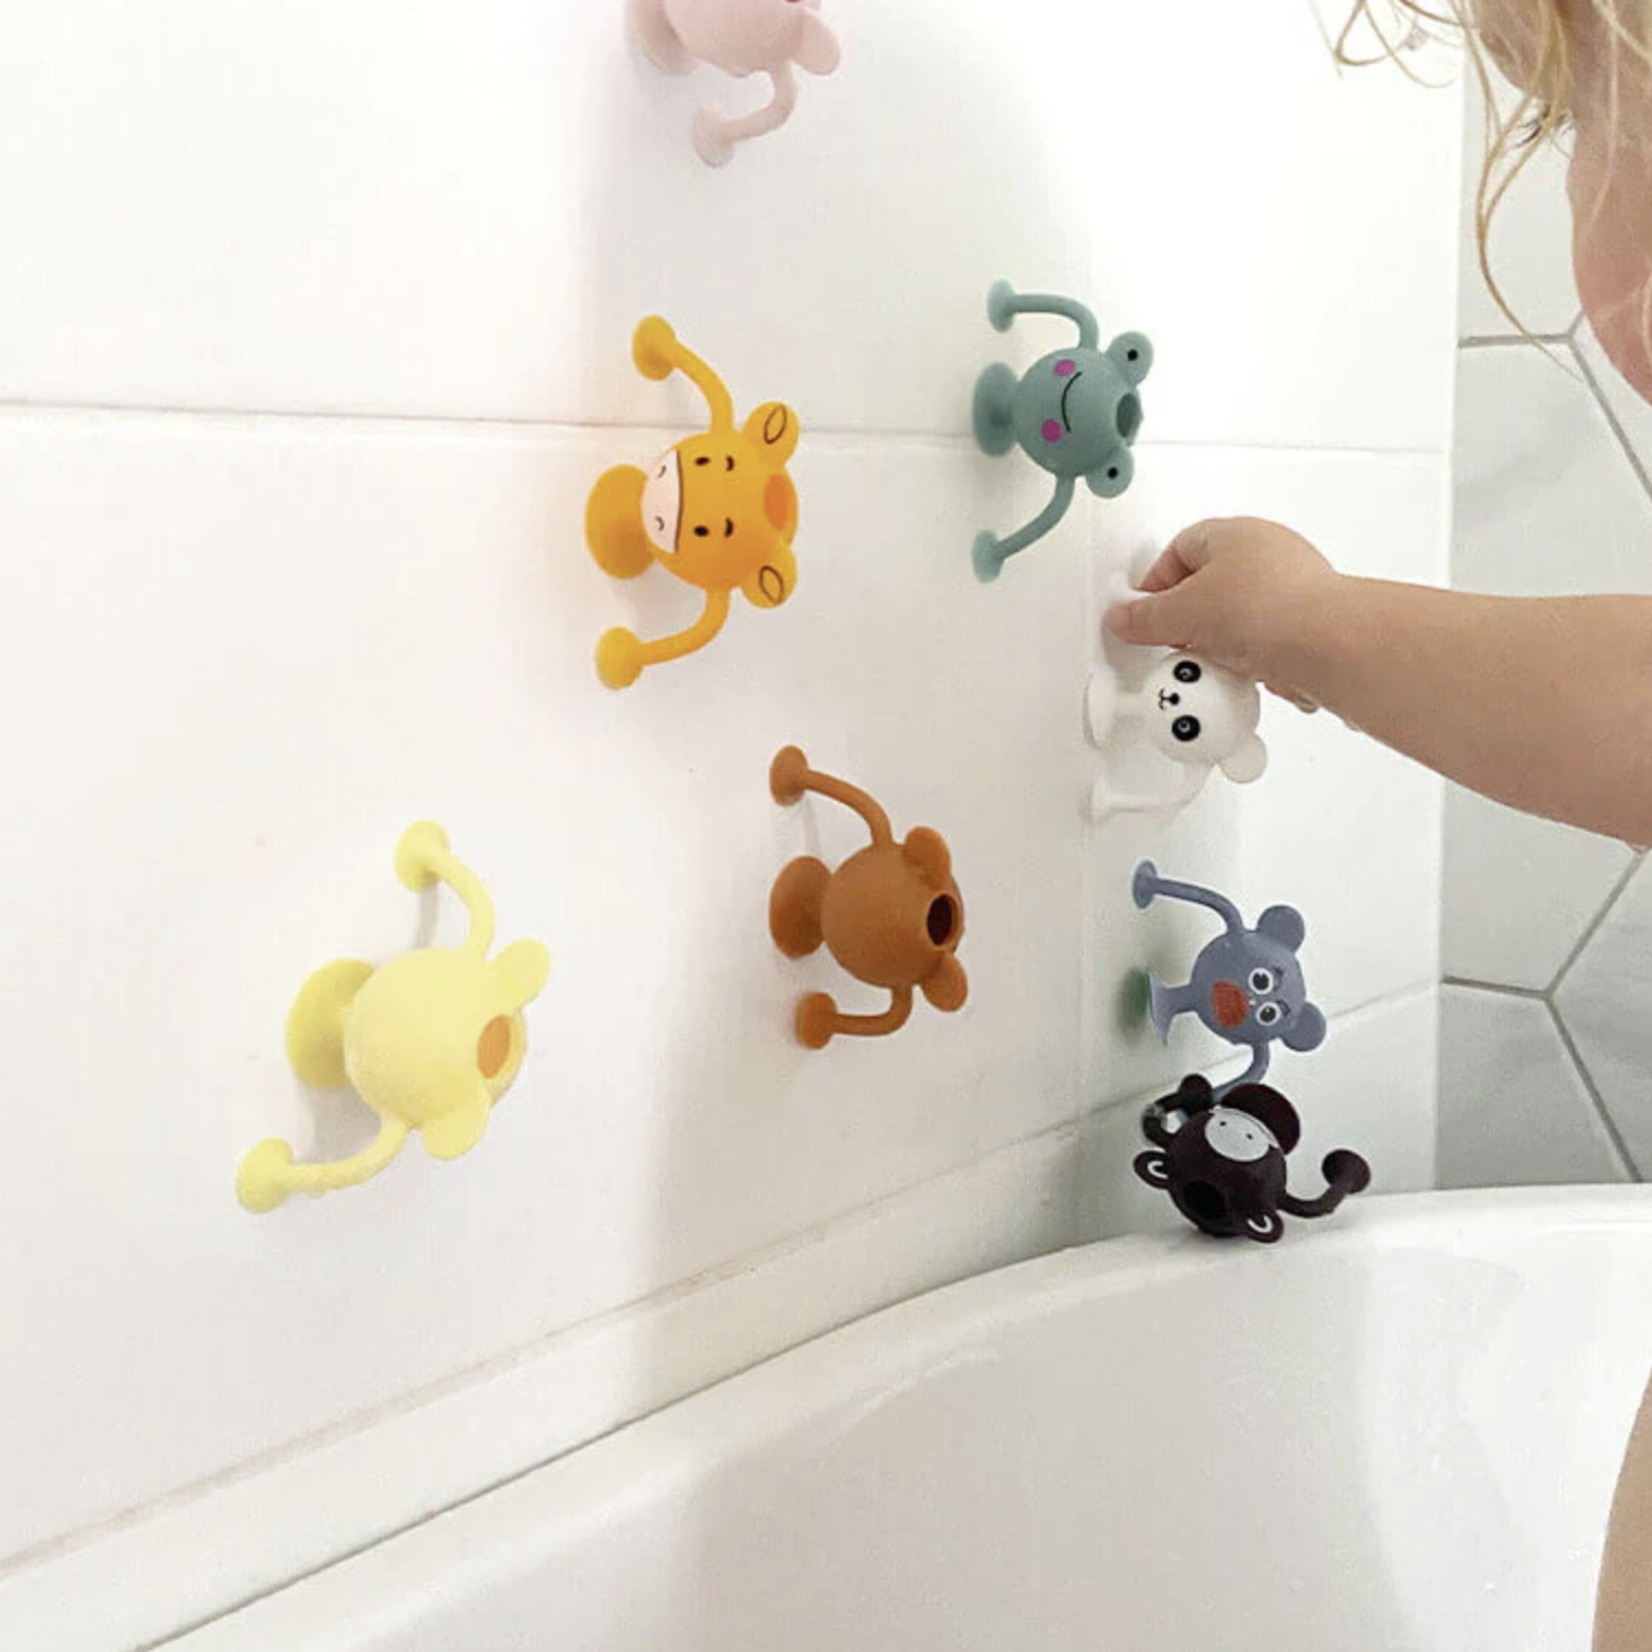 Cherub Baby SILICONE SUCTION TODDLER BATH TOYS 12PK – ENTIRE ZOO COLLECTION - PASTEL